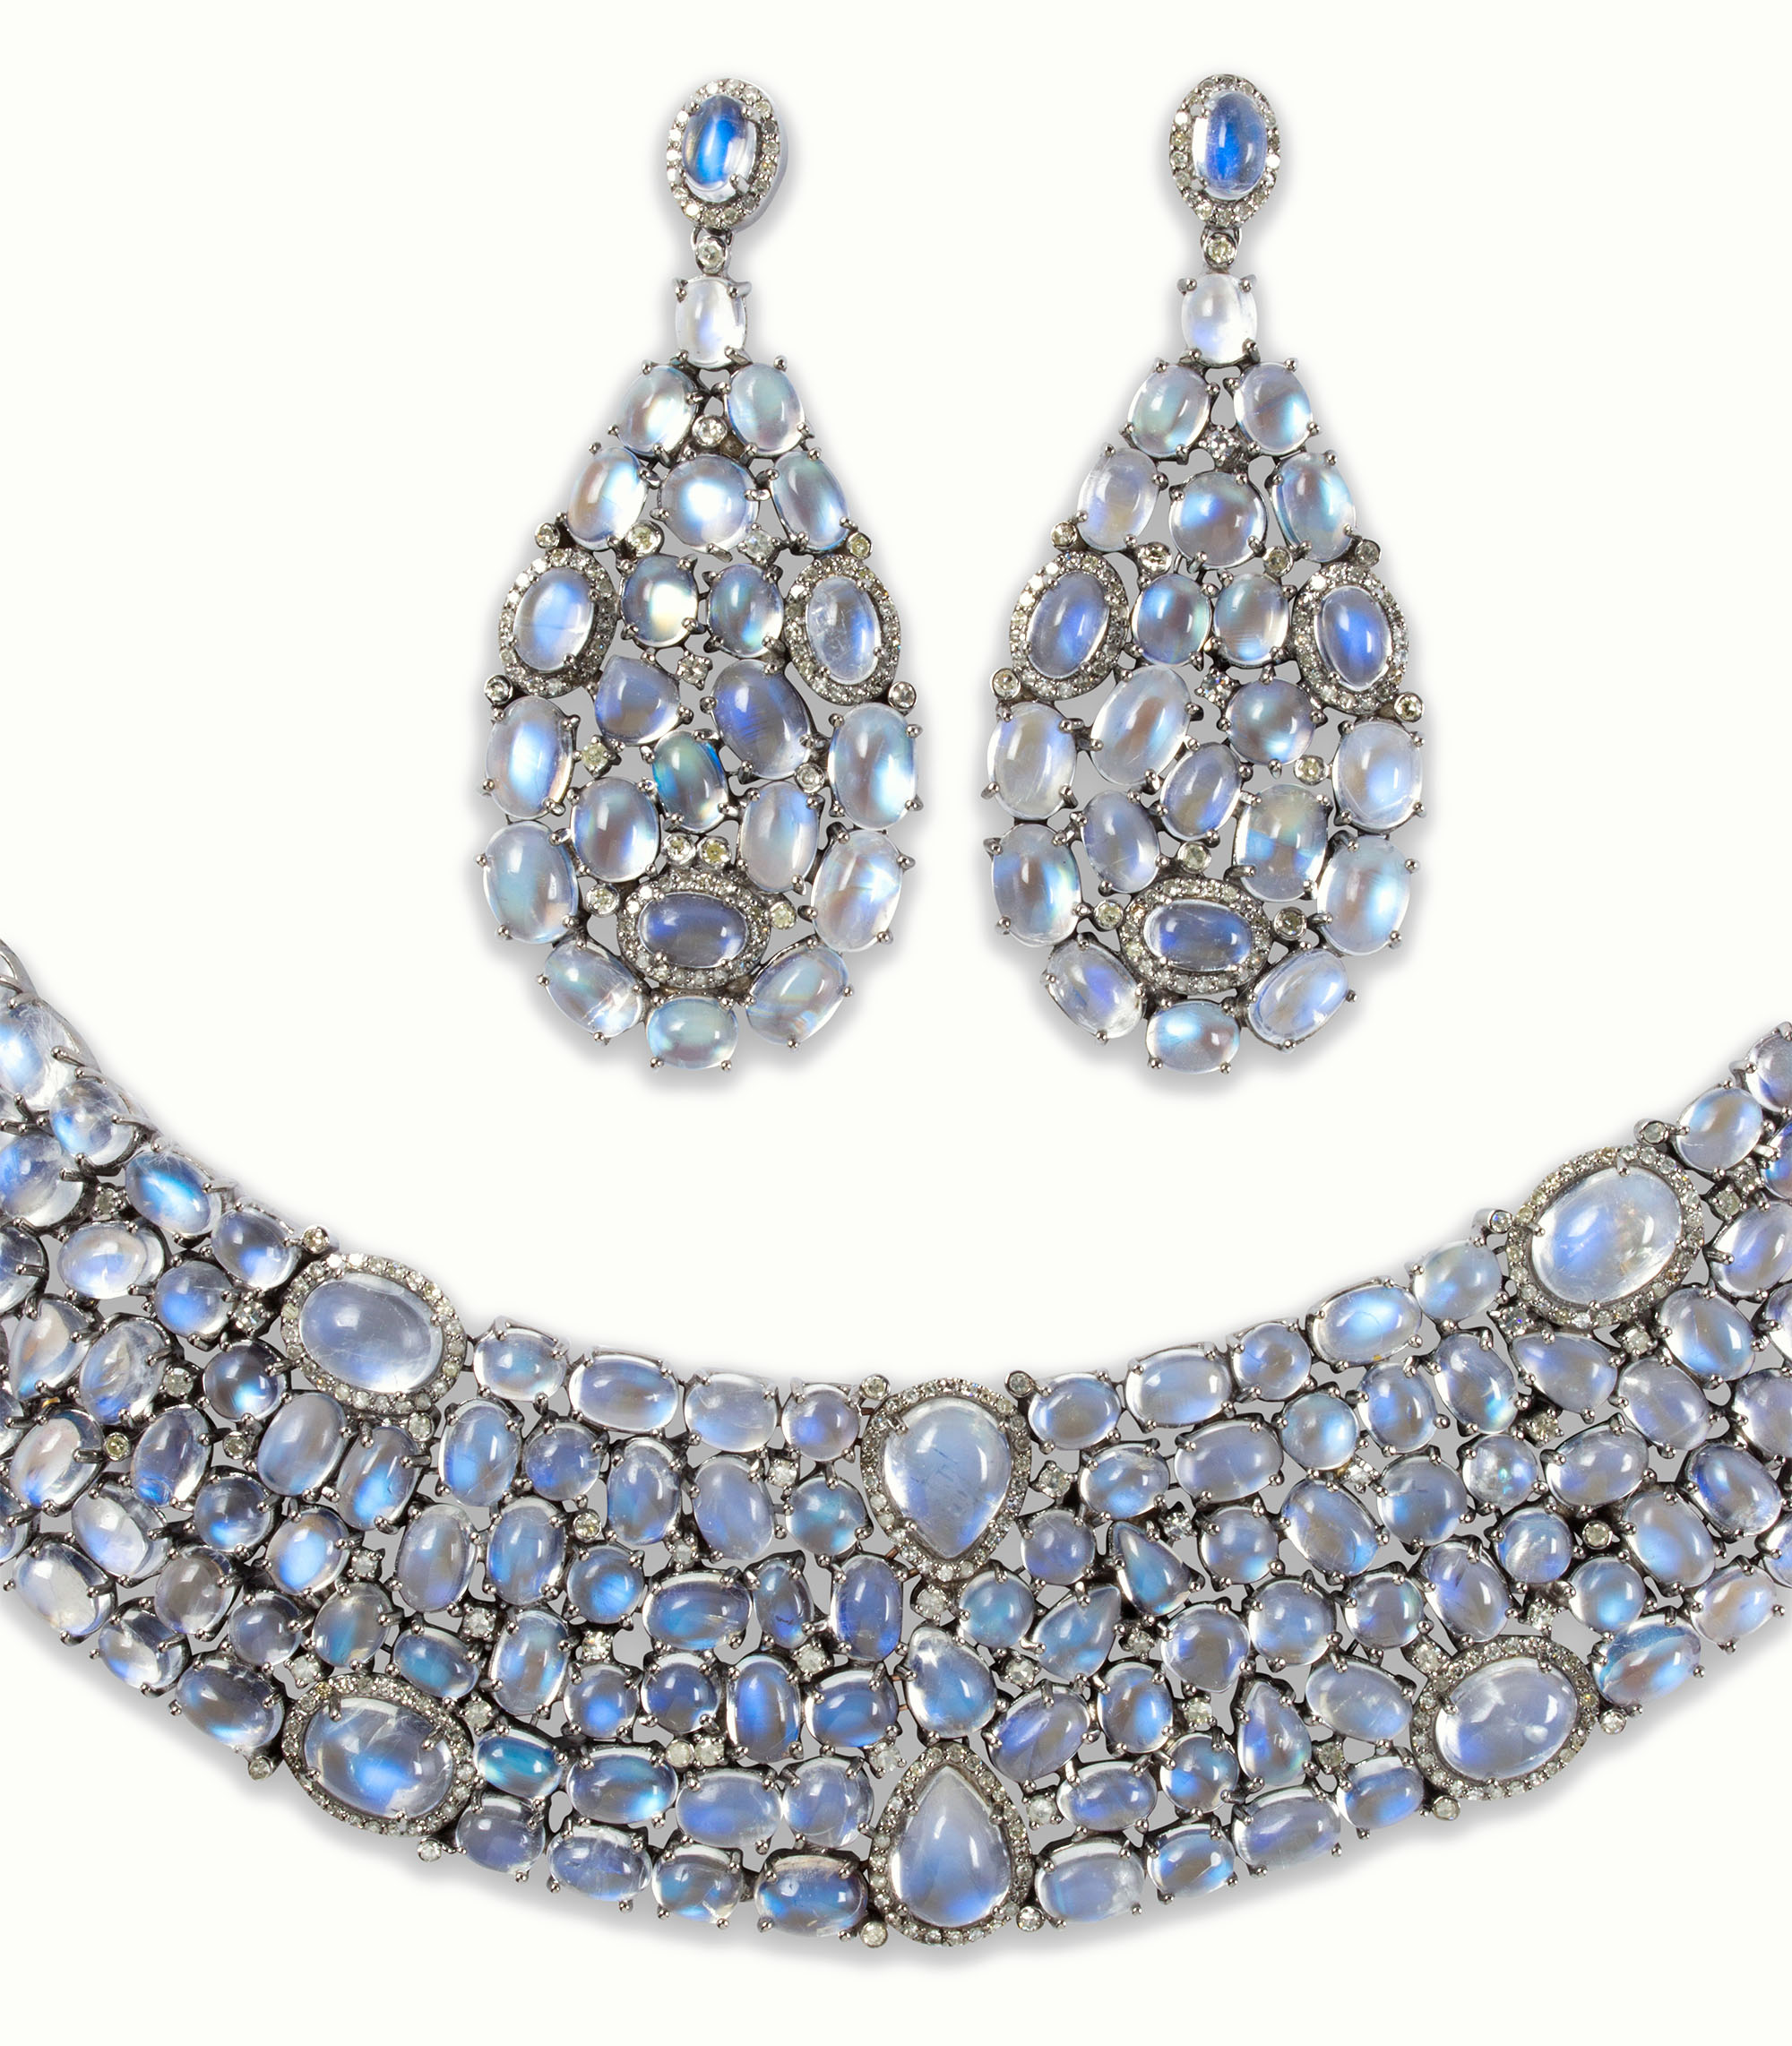 A pair of blue moonstone and diamond earrings and necklace suite